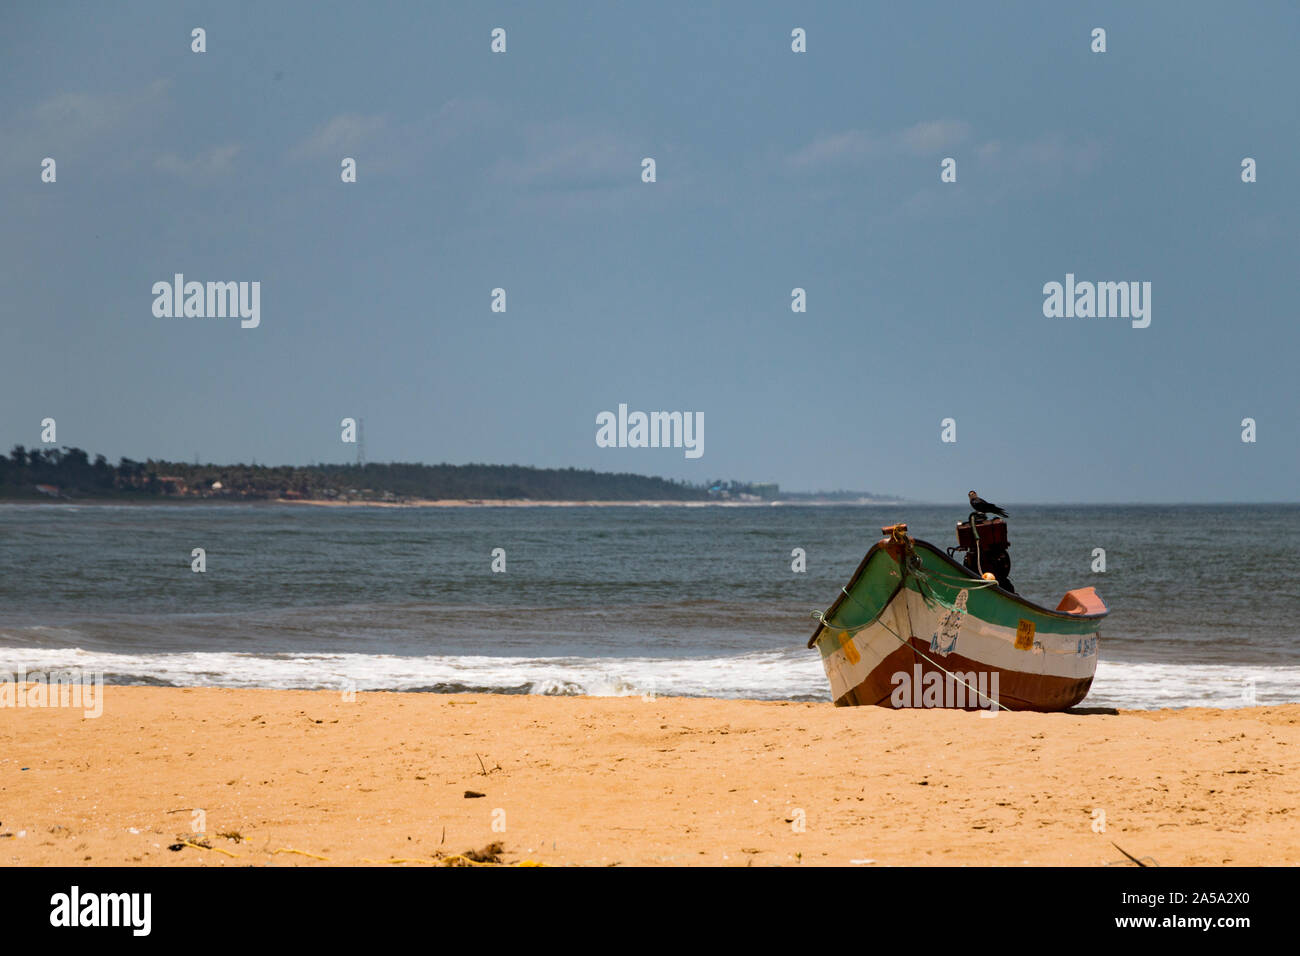 green, white and red fishing boat on a sandy beach on a sunny day with a crow sitting on the engine - India, Mamallapuram September 2019 Stock Photo